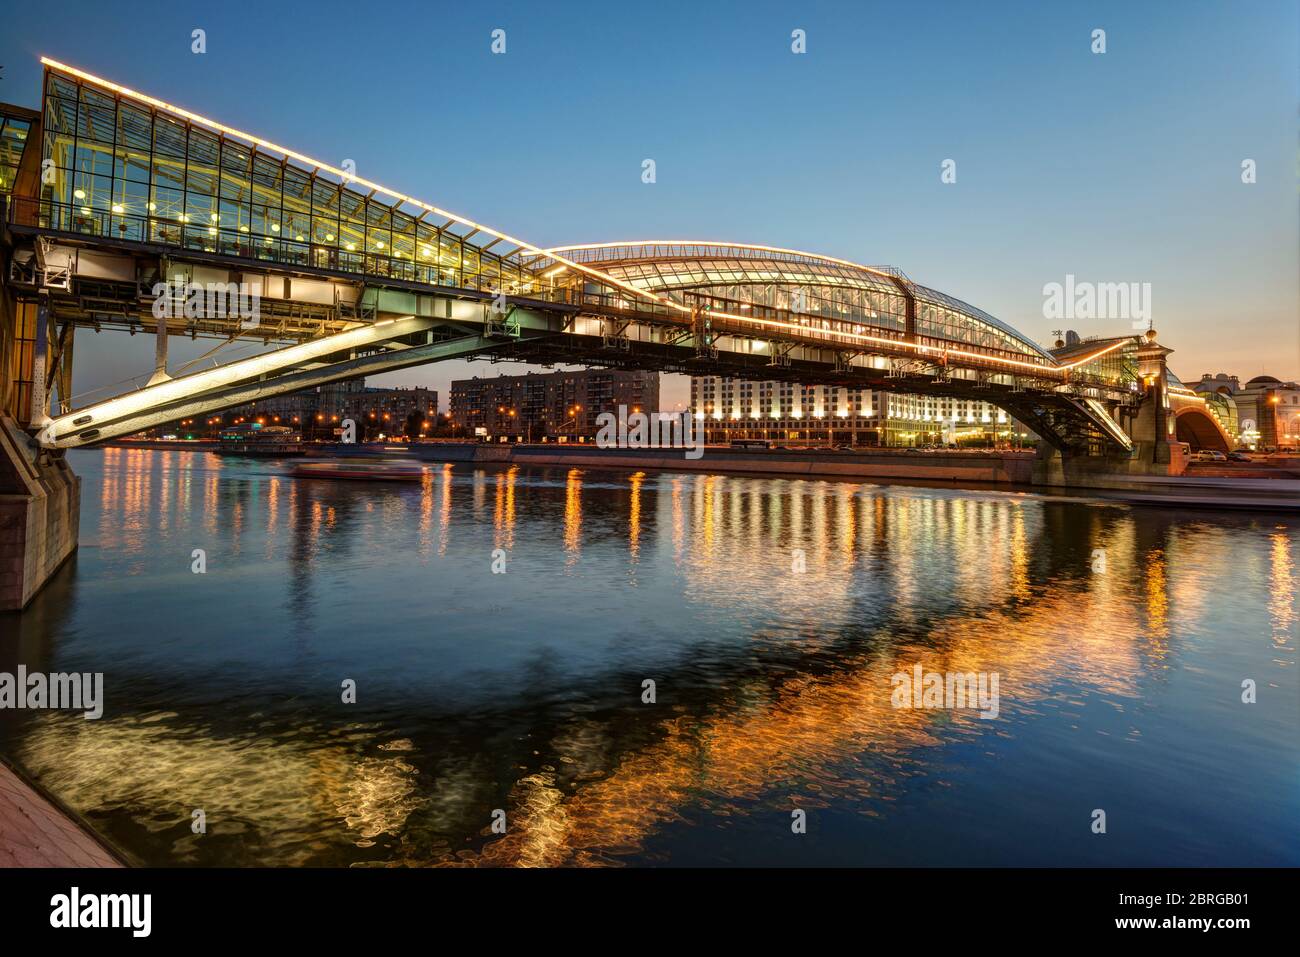 MOSCOW - AUGUST 20: Bogdan Khmelnitsky bridge at night on august 20, 2013 in Moscow. It is a beautiful pedestrian bridge across the Moscow River near Stock Photo